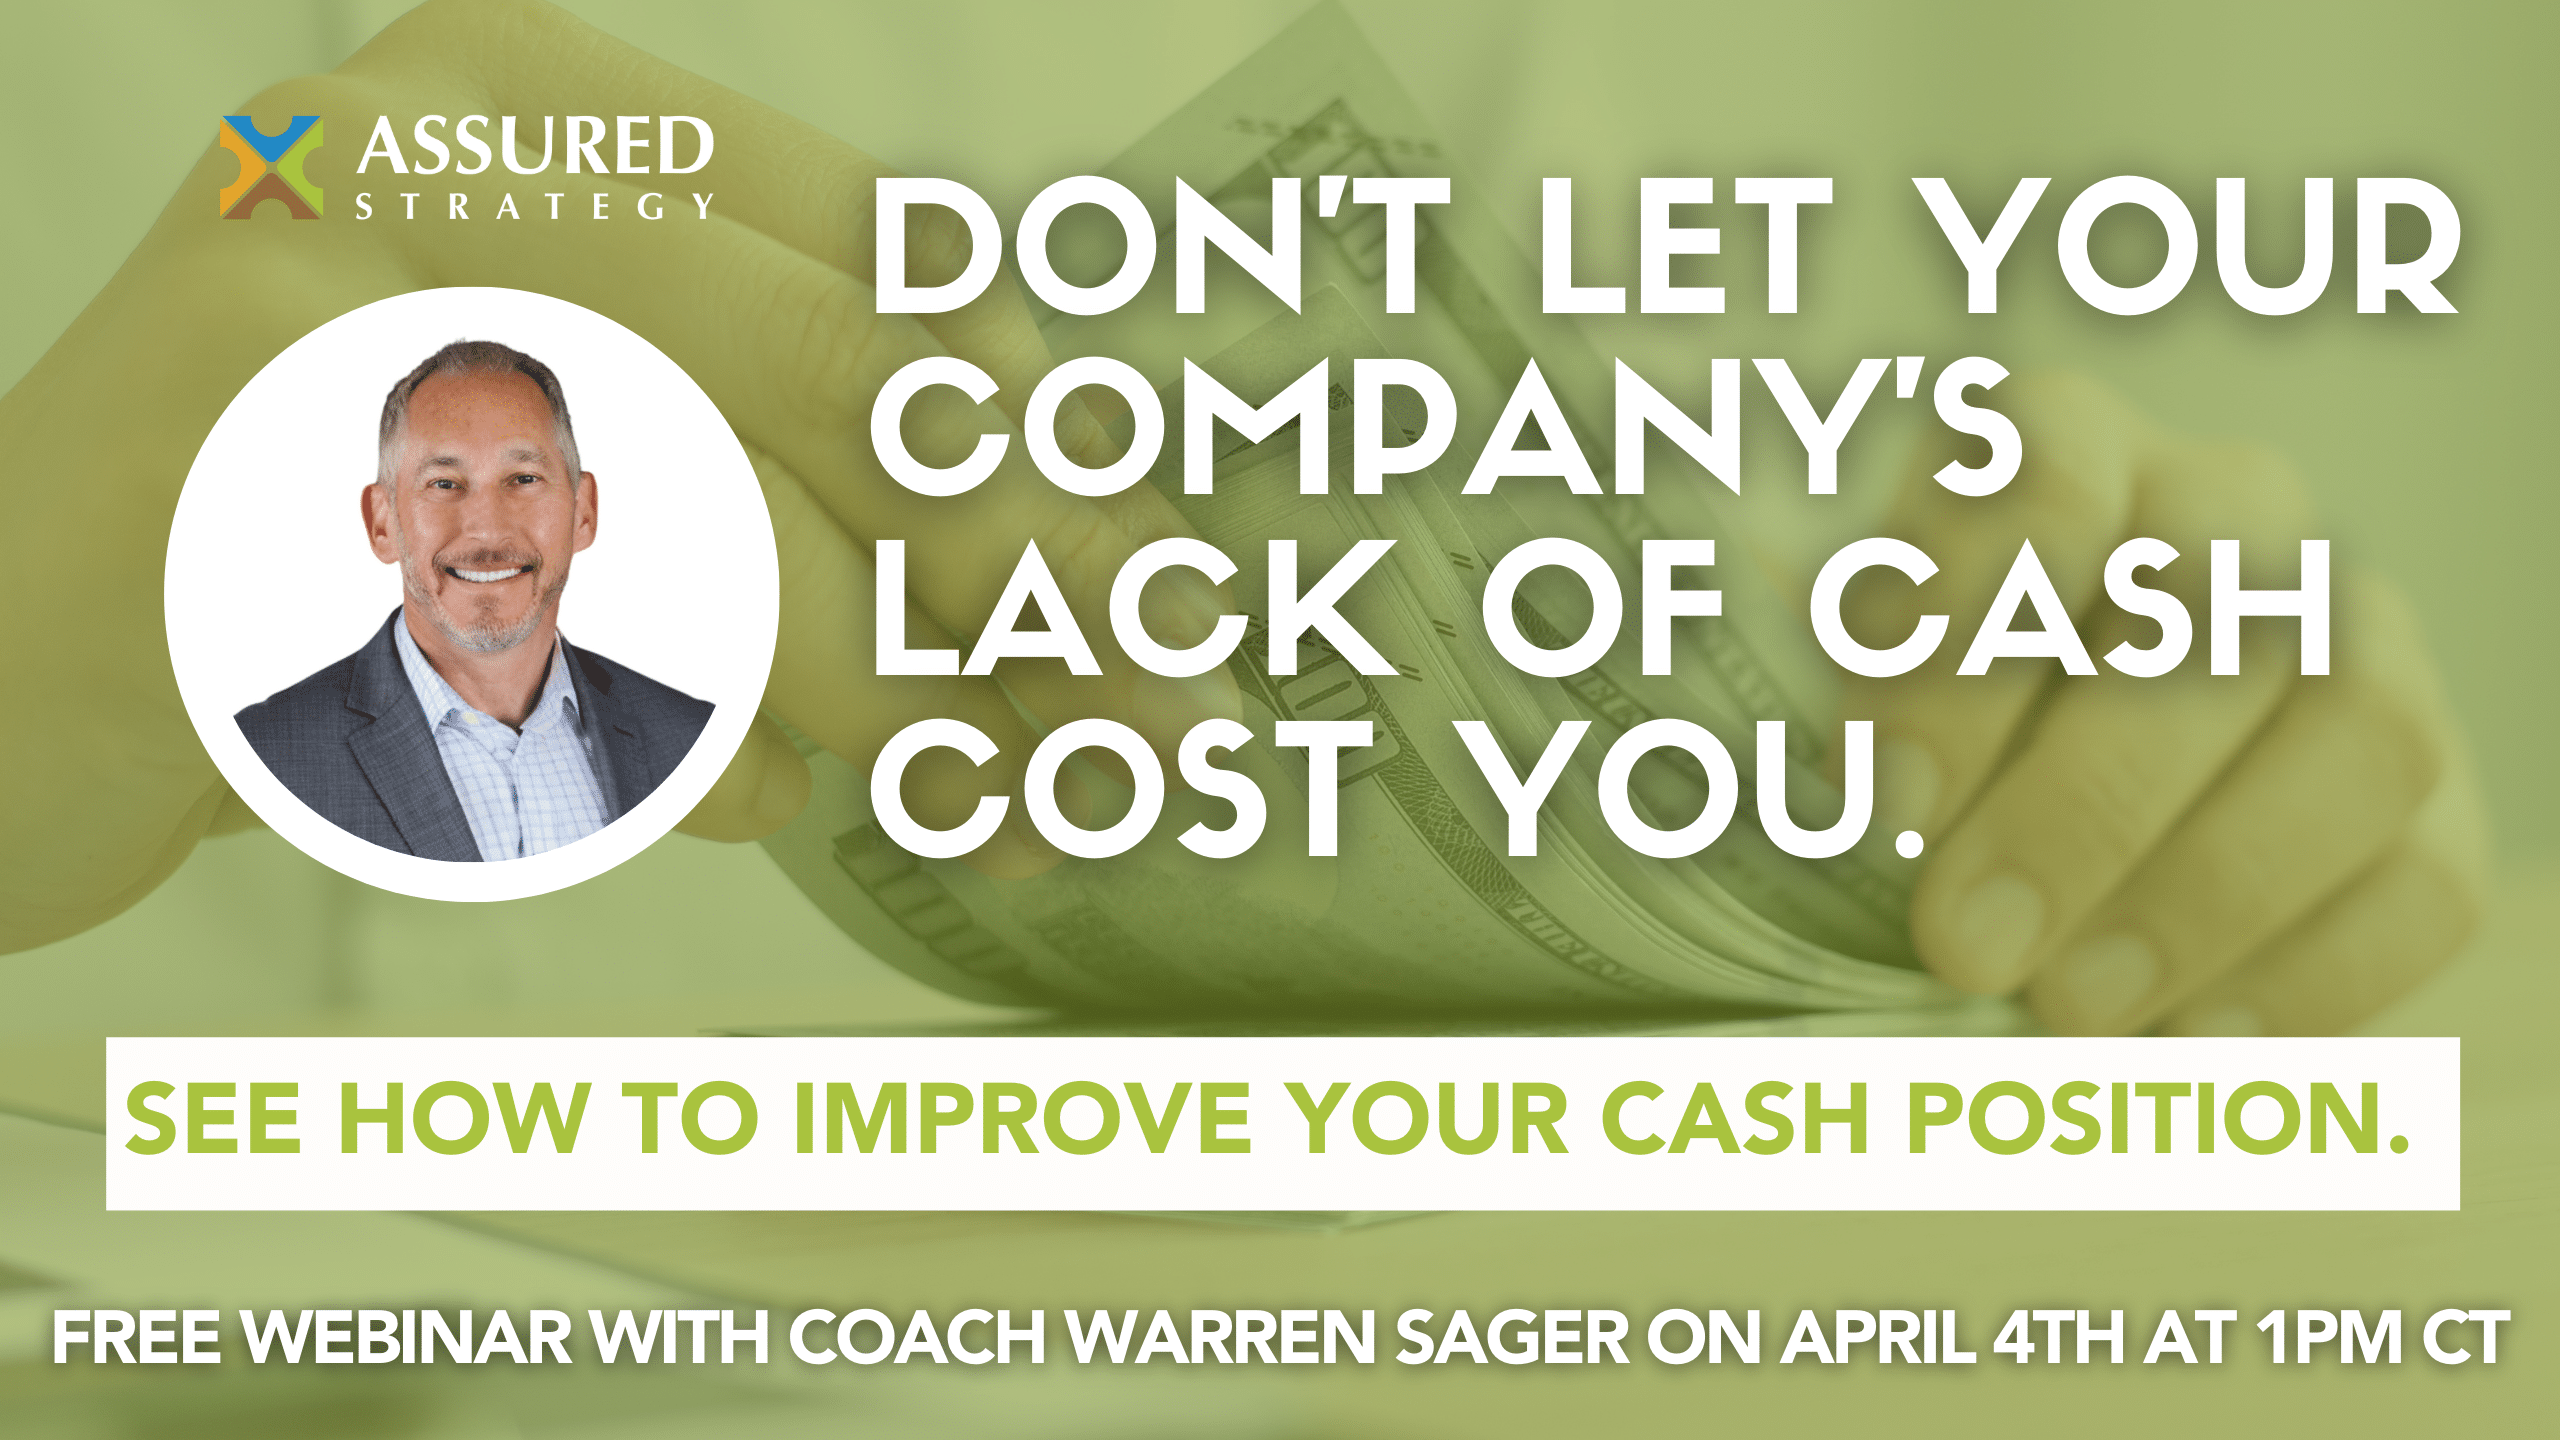 Free Webinar: Improve Your Cash Position with 7 Simple Key Financial Levers – April 4th from 1-2pm CT